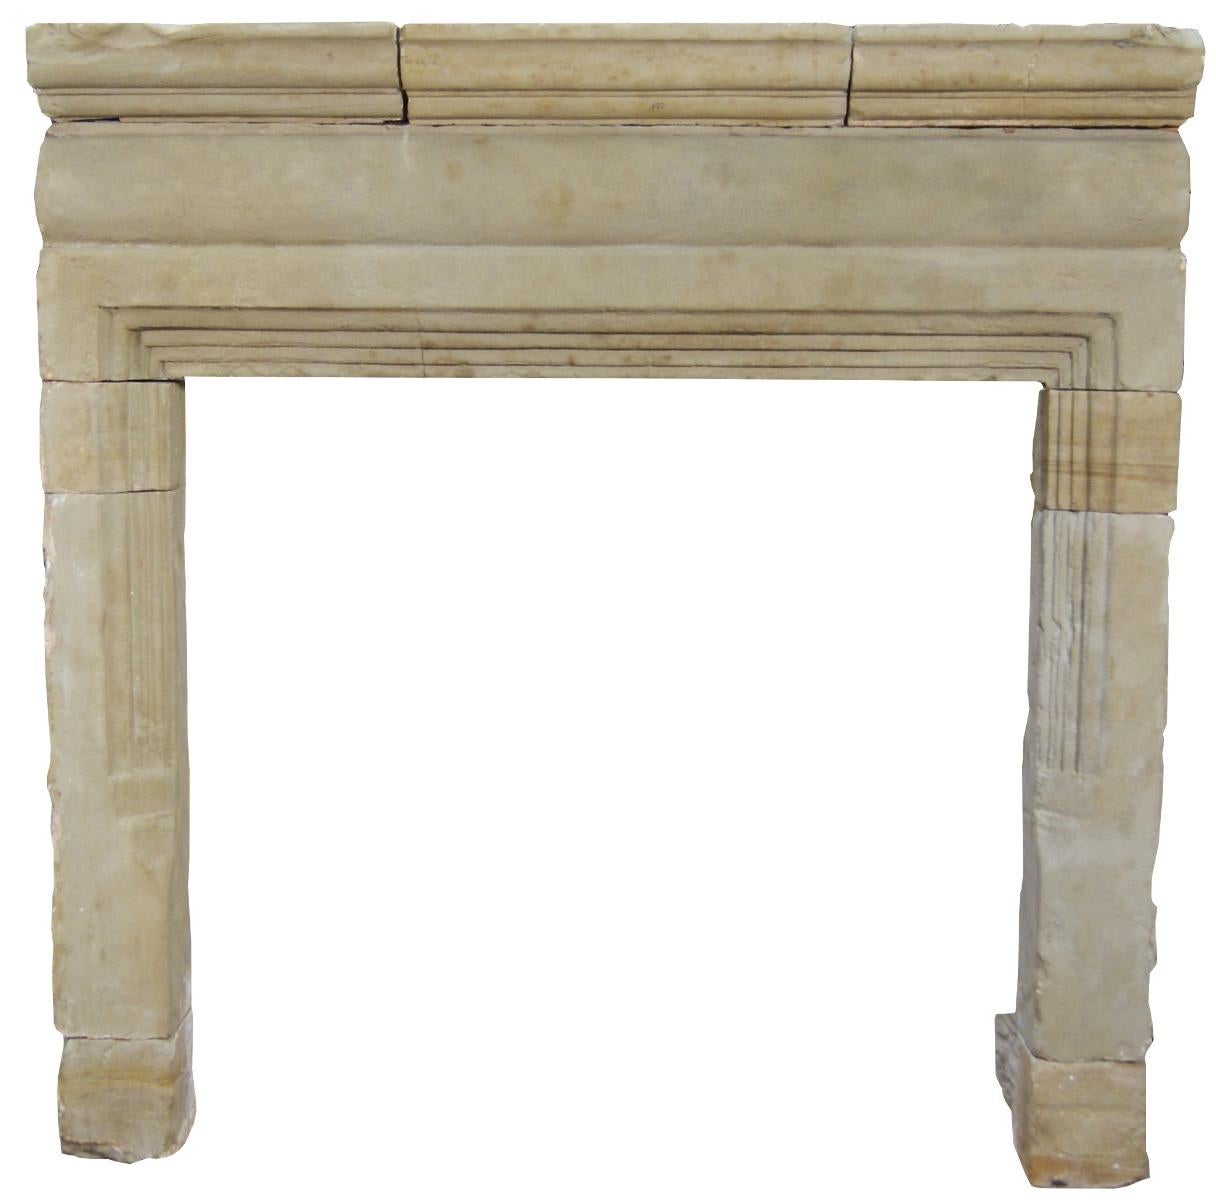 17th Century English Stone Fire Mantel For Sale 2